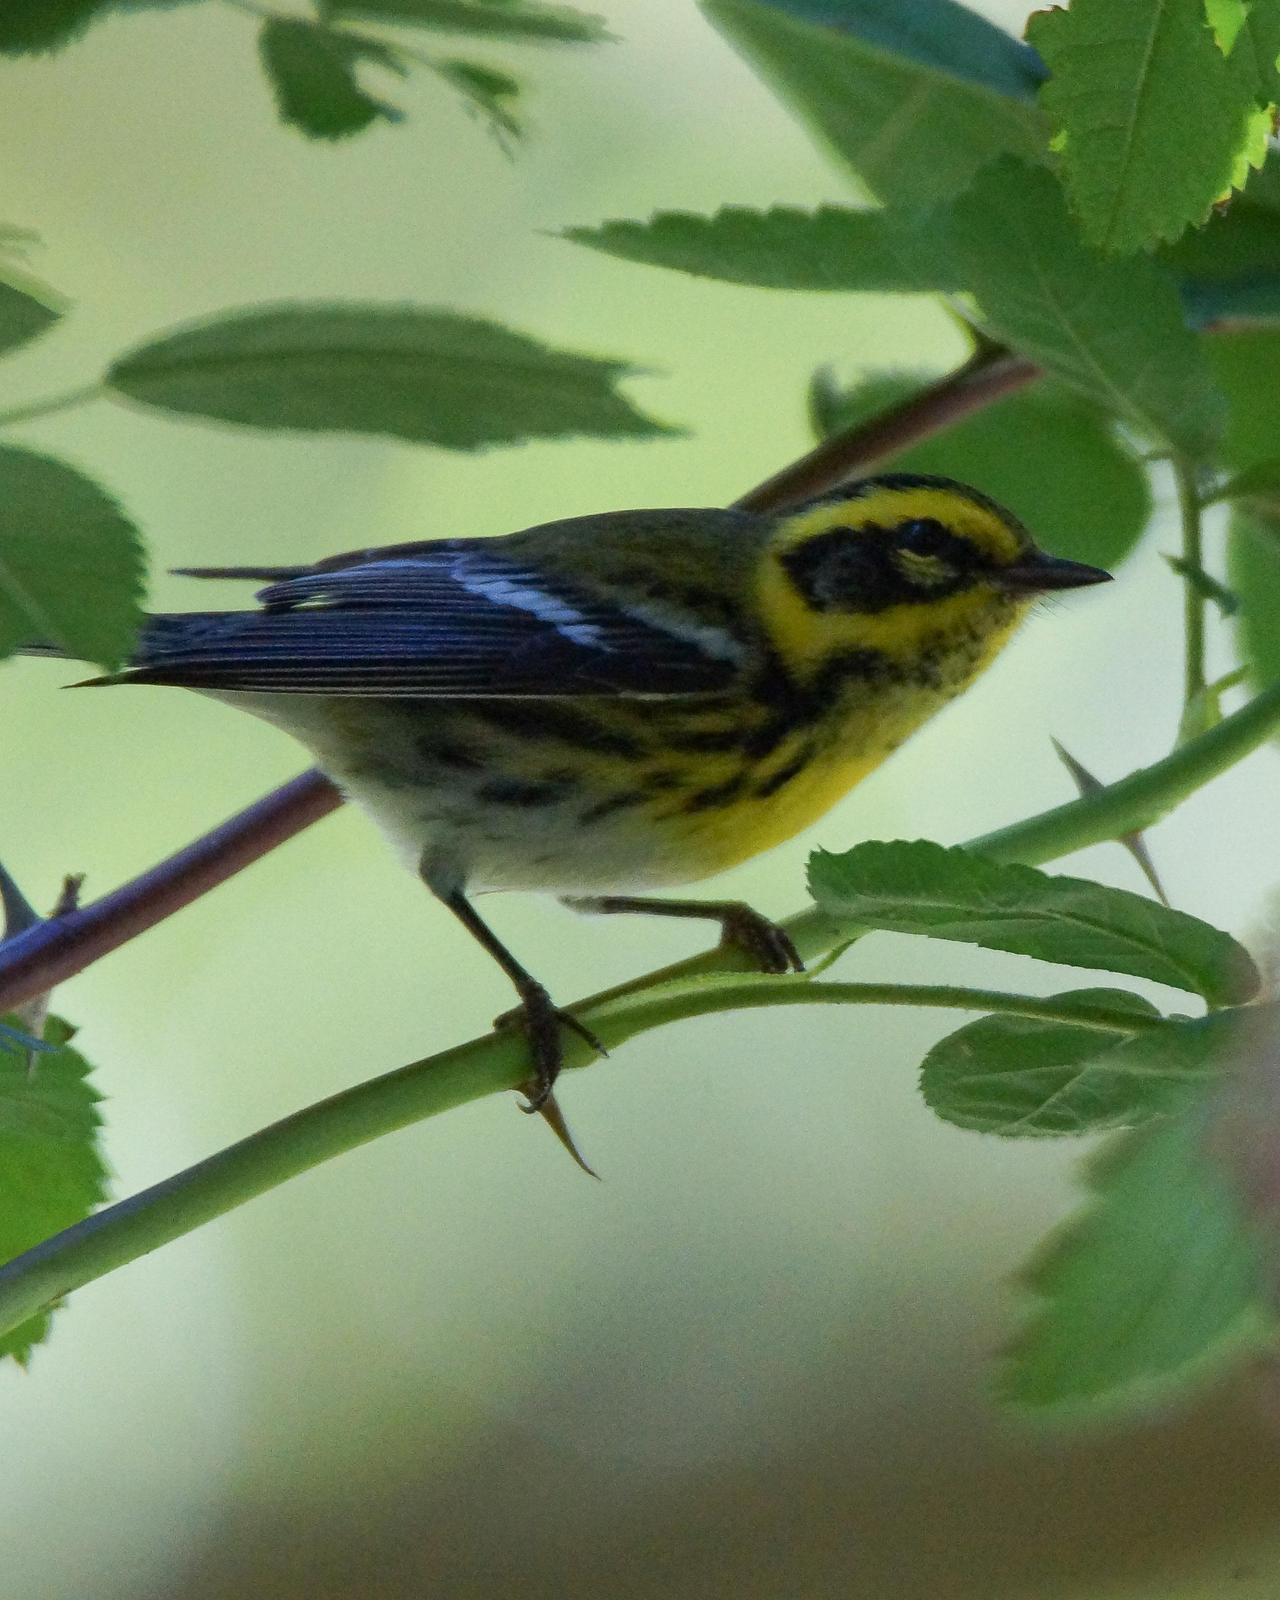 Townsend's Warbler Photo by Steve Percival